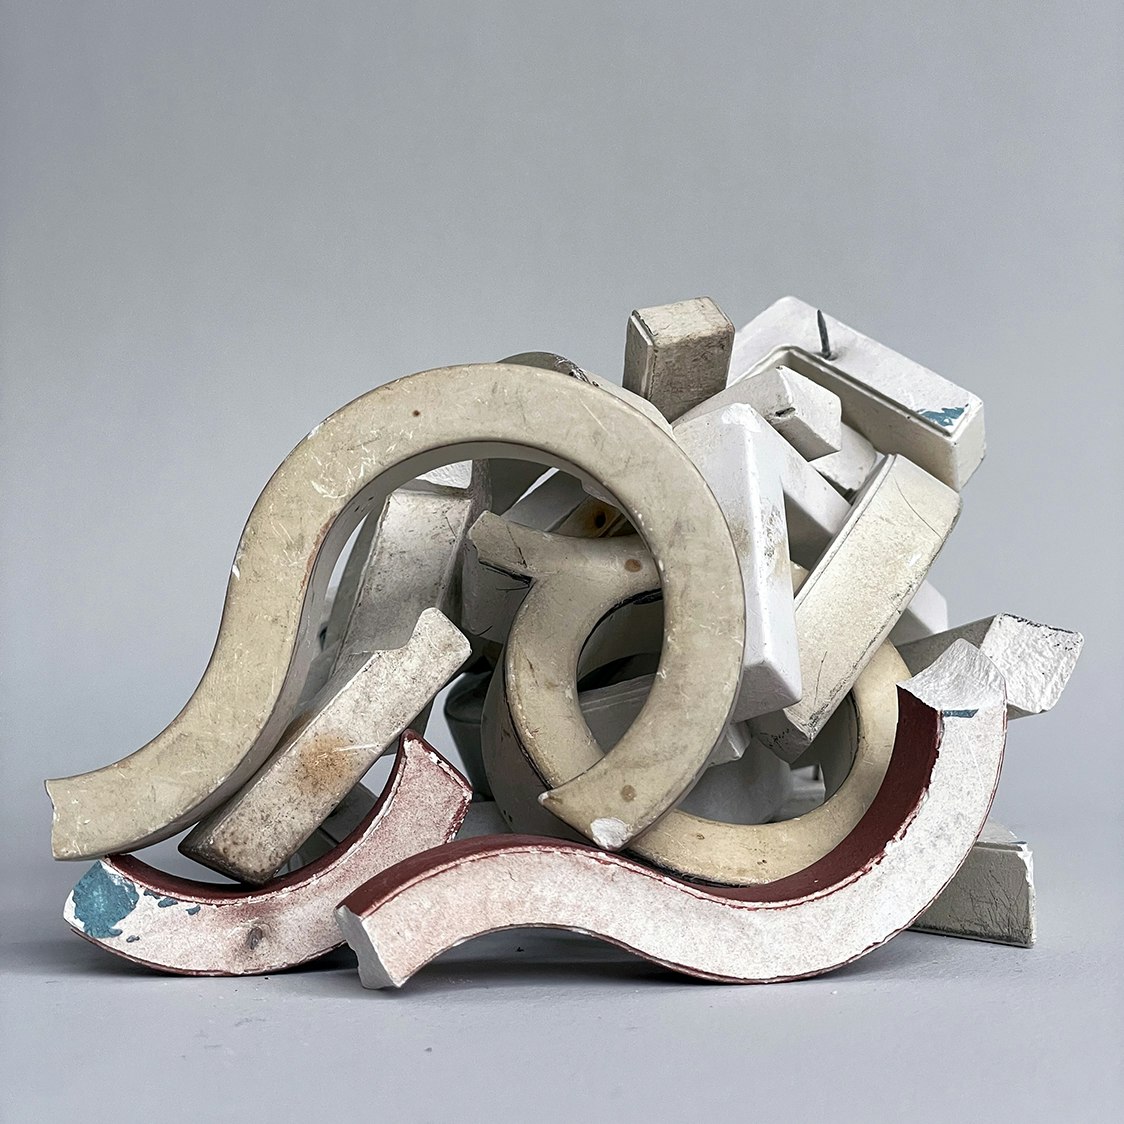 Photo of Mary Lum's "Letter Parts 2"